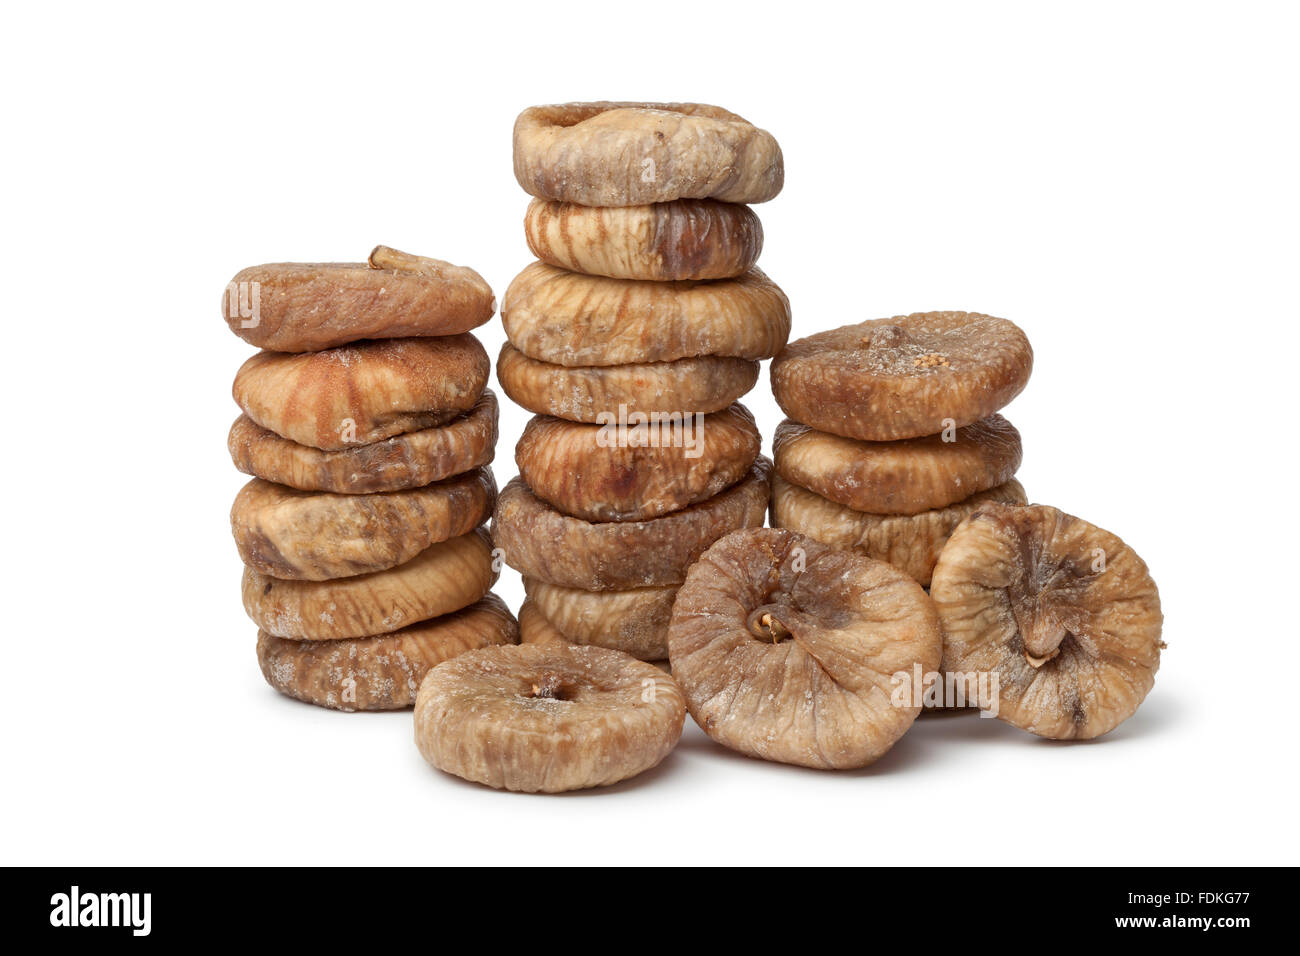 Dried figs in rows on white background Stock Photo